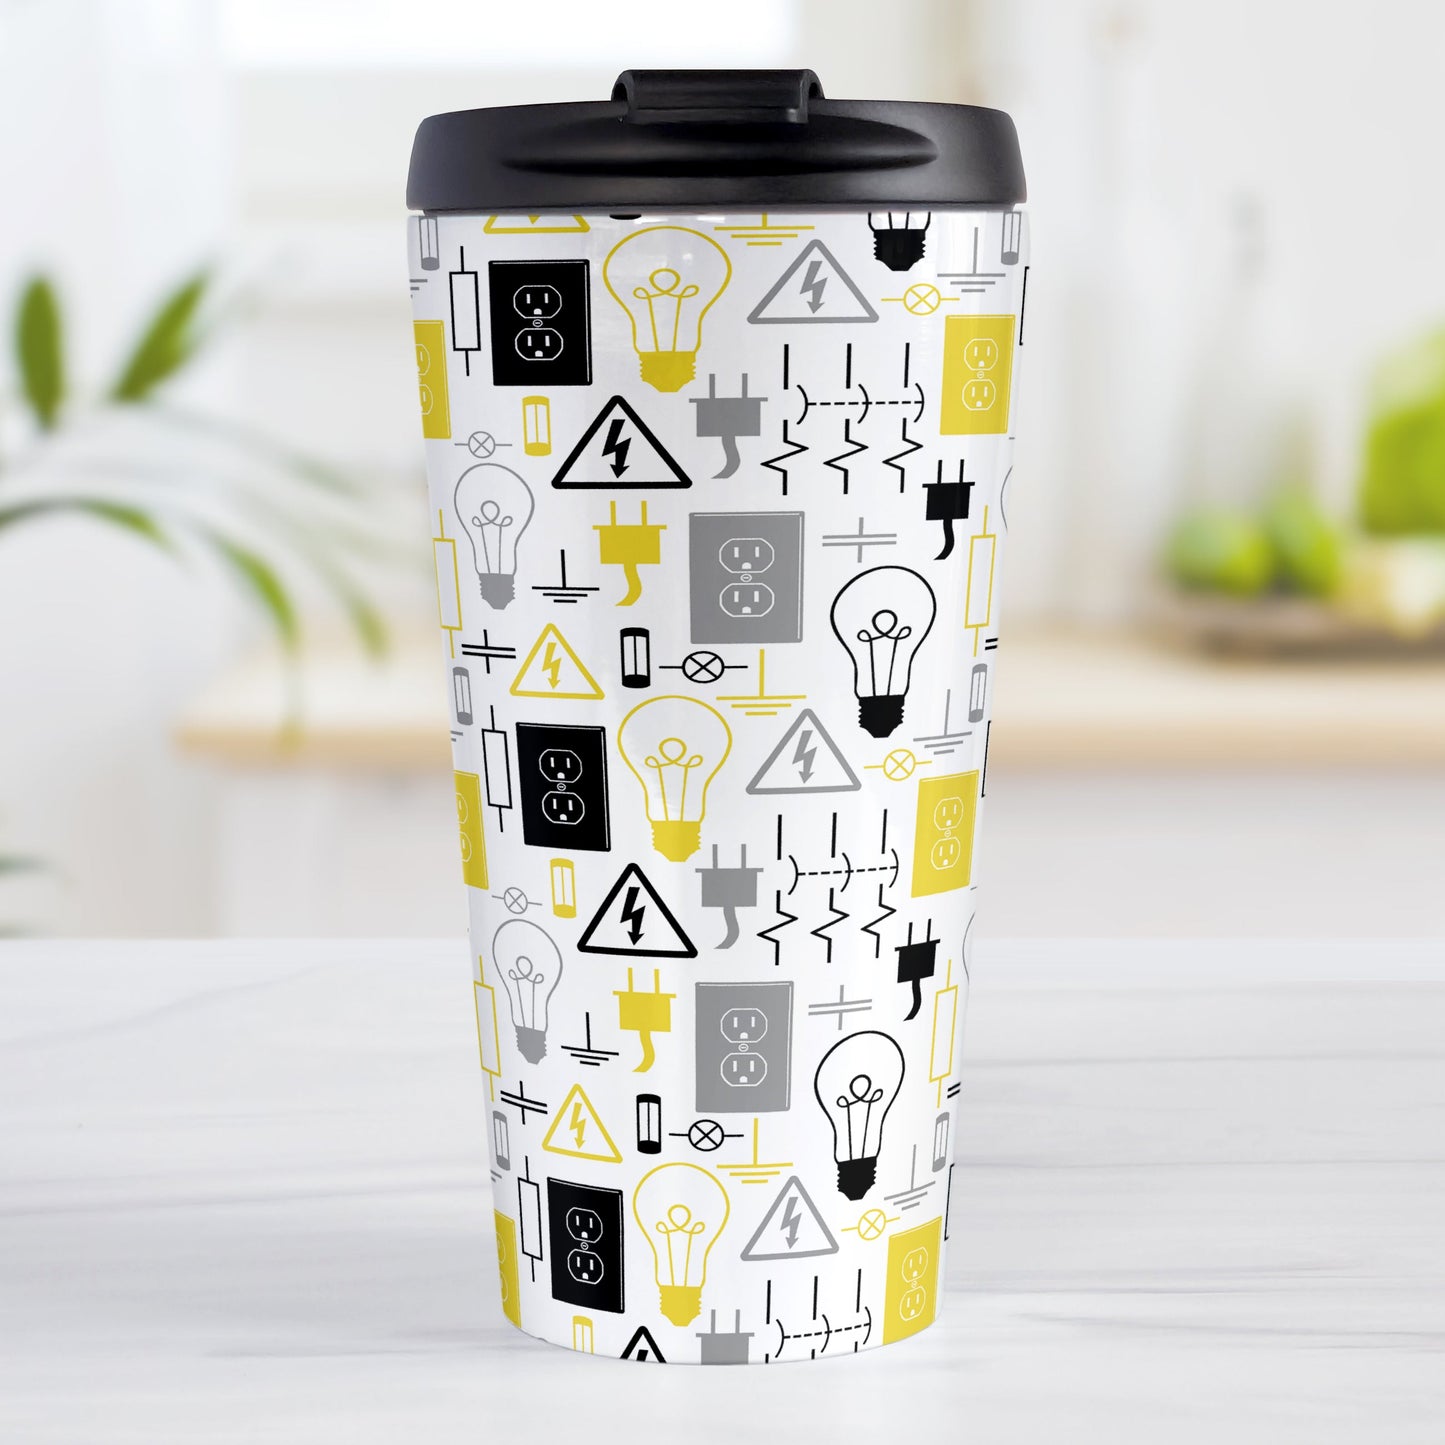 Yellow Gray Electrical Electrician Travel Mug (15oz) at Amy's Coffee Mugs. A stainless steel travel mug designed with an electrical pattern with light bulbs, wall sockets, plugs, fuses, and other electricity symbols in yellow, gray, and black colors. This travel mug is perfect for people who work a trade as an electrician or love working with electronics. 